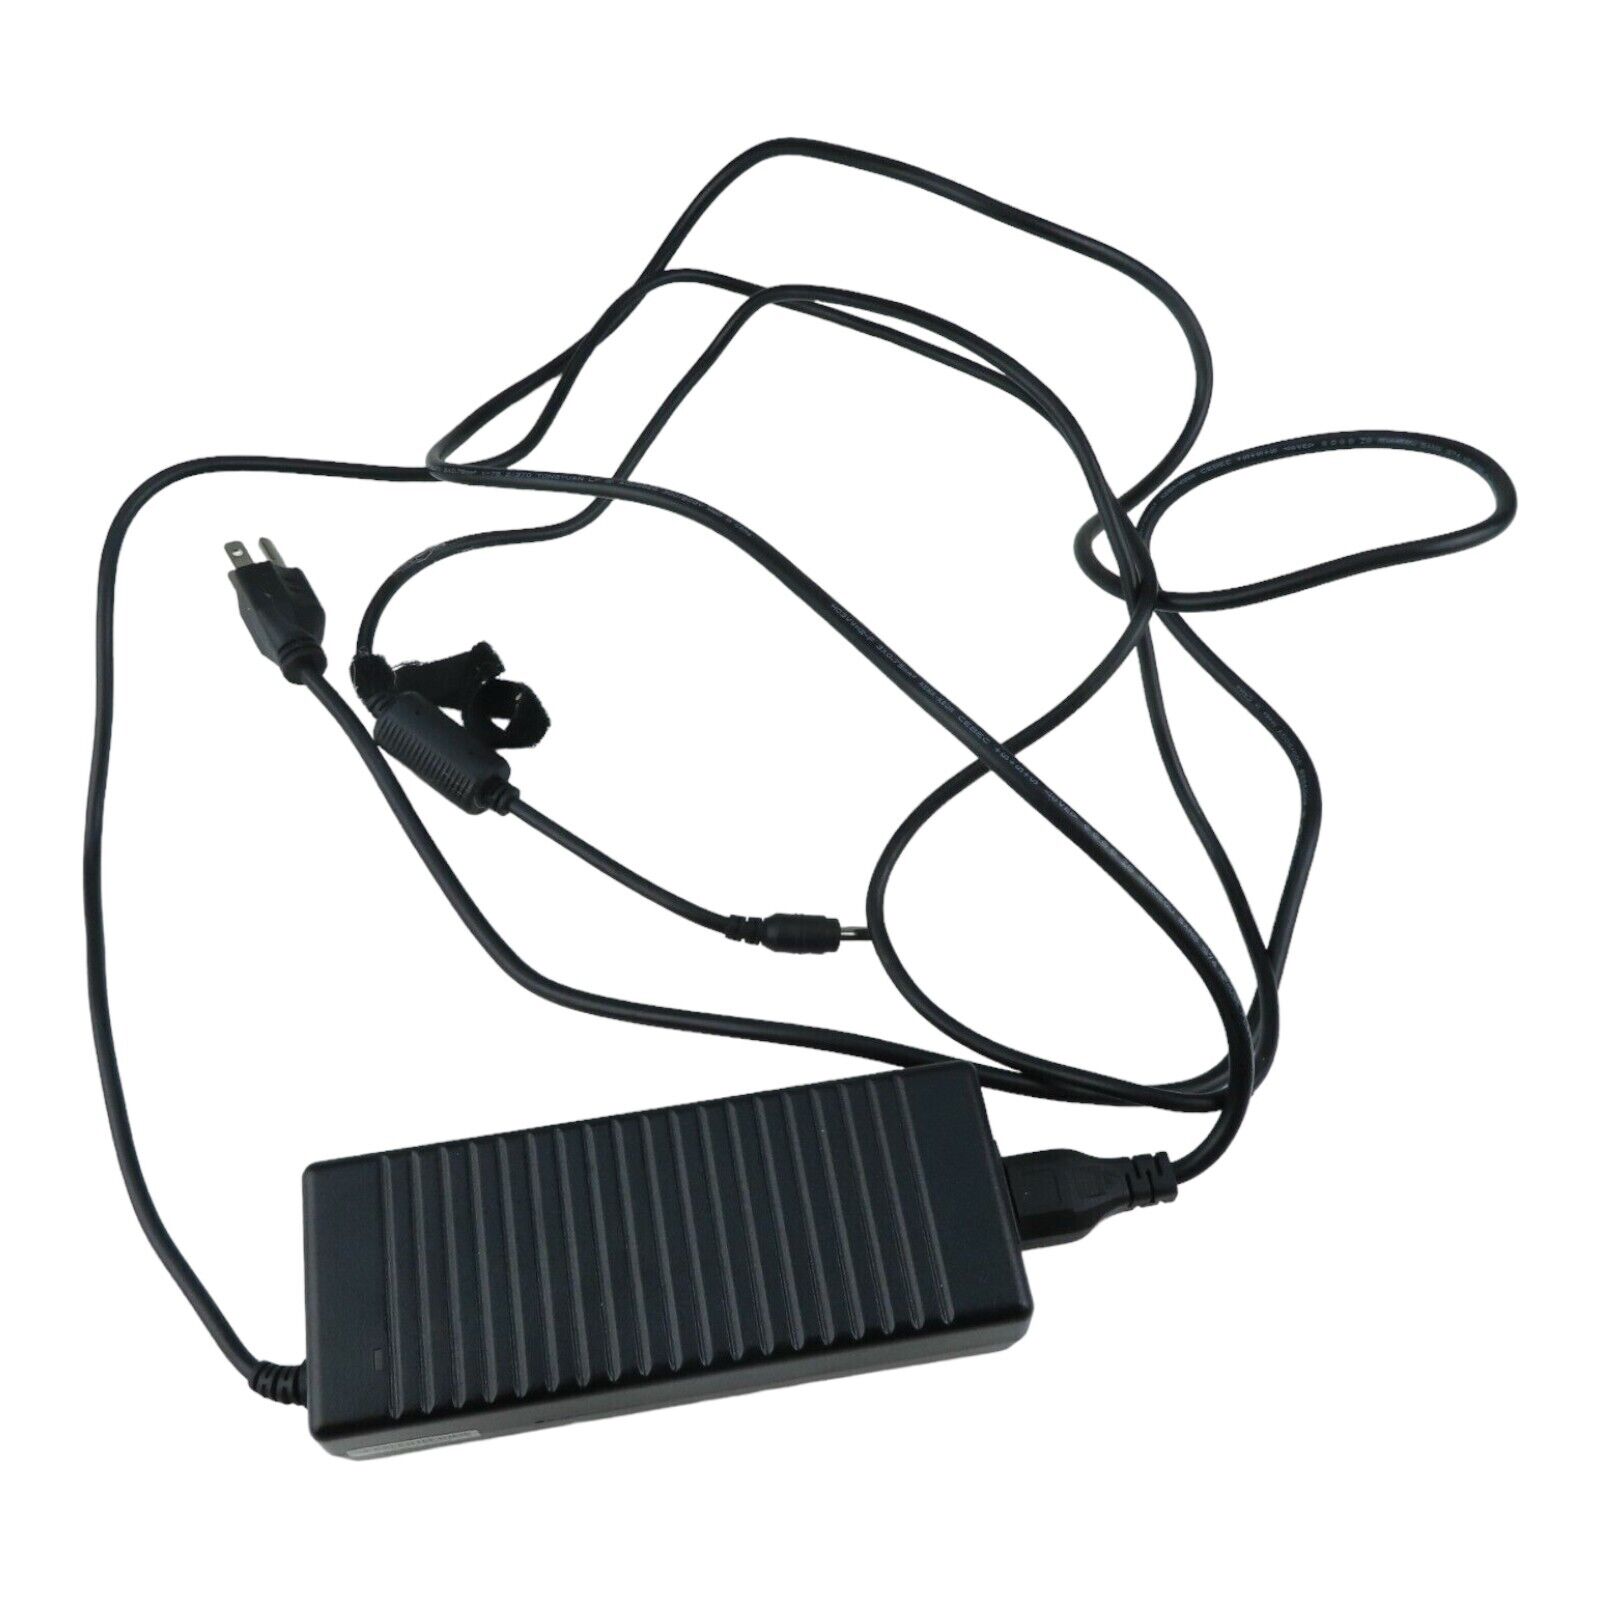 PWR+ P3 15.6V 7.05A 110W Power Adapter For Panasonic Toughbook